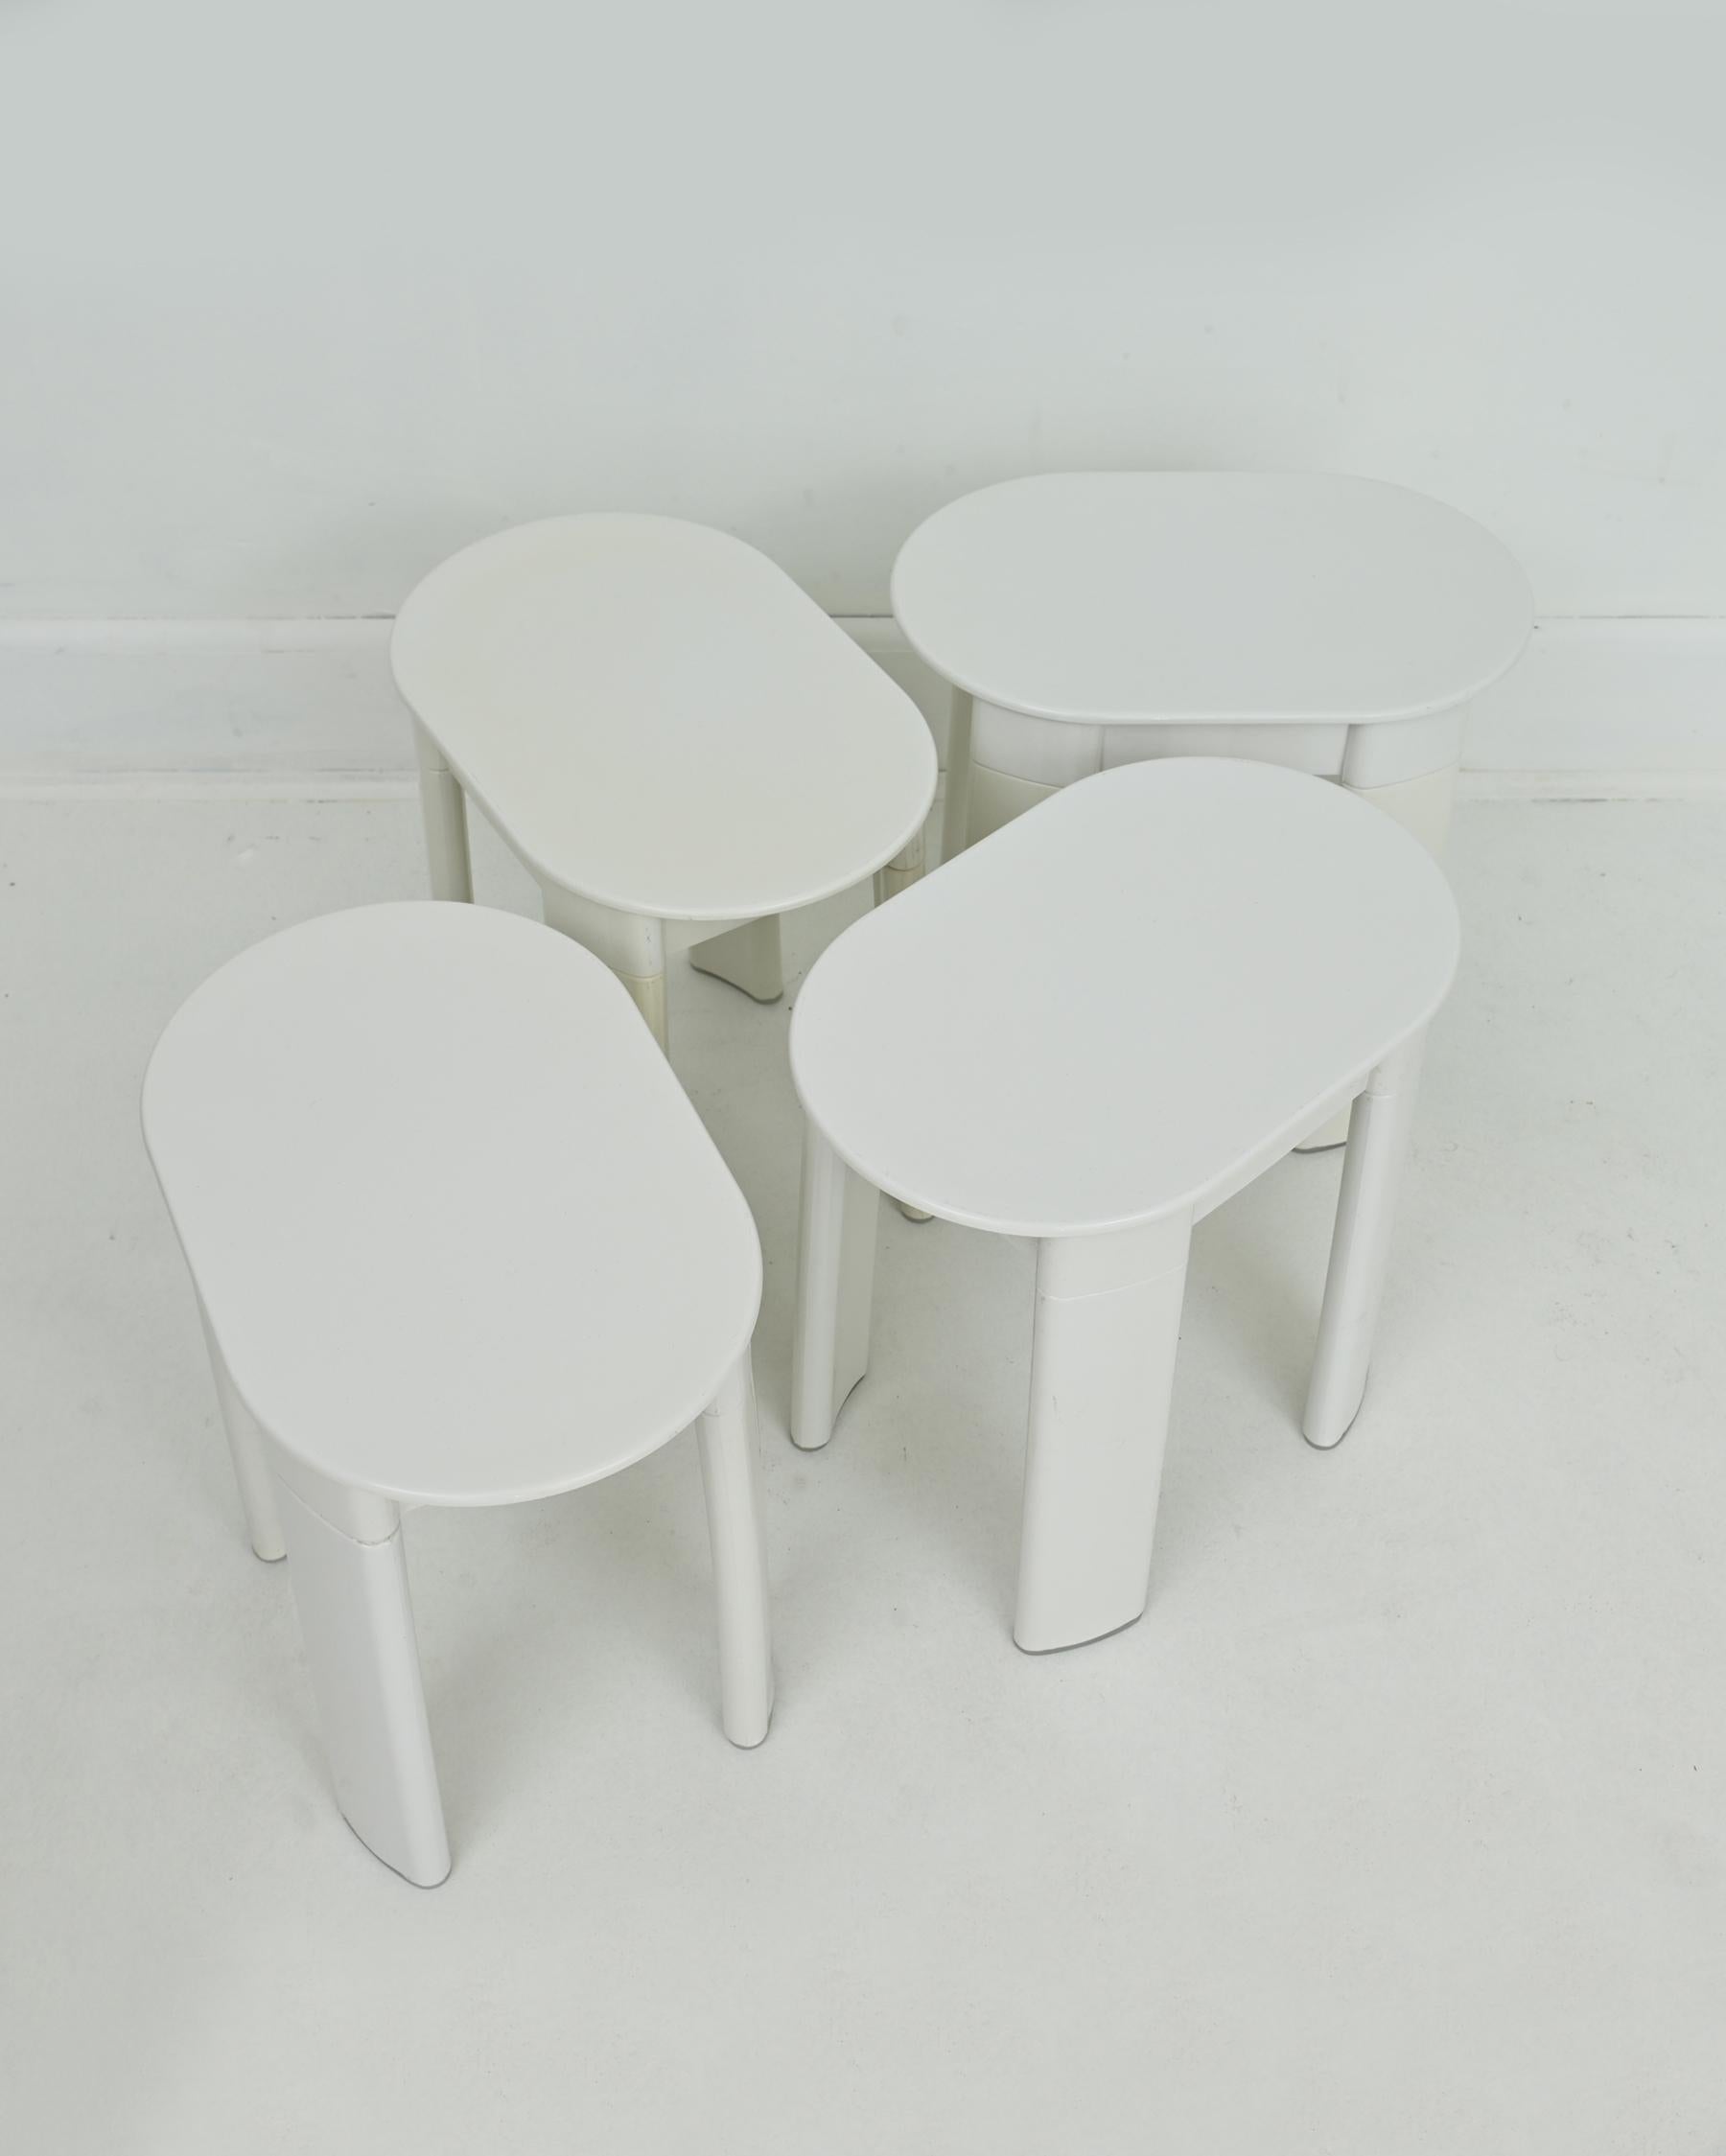 Fin du 20e siècle Four 1970s White Side Table by Olaf von Bohr for GEDY  en vente